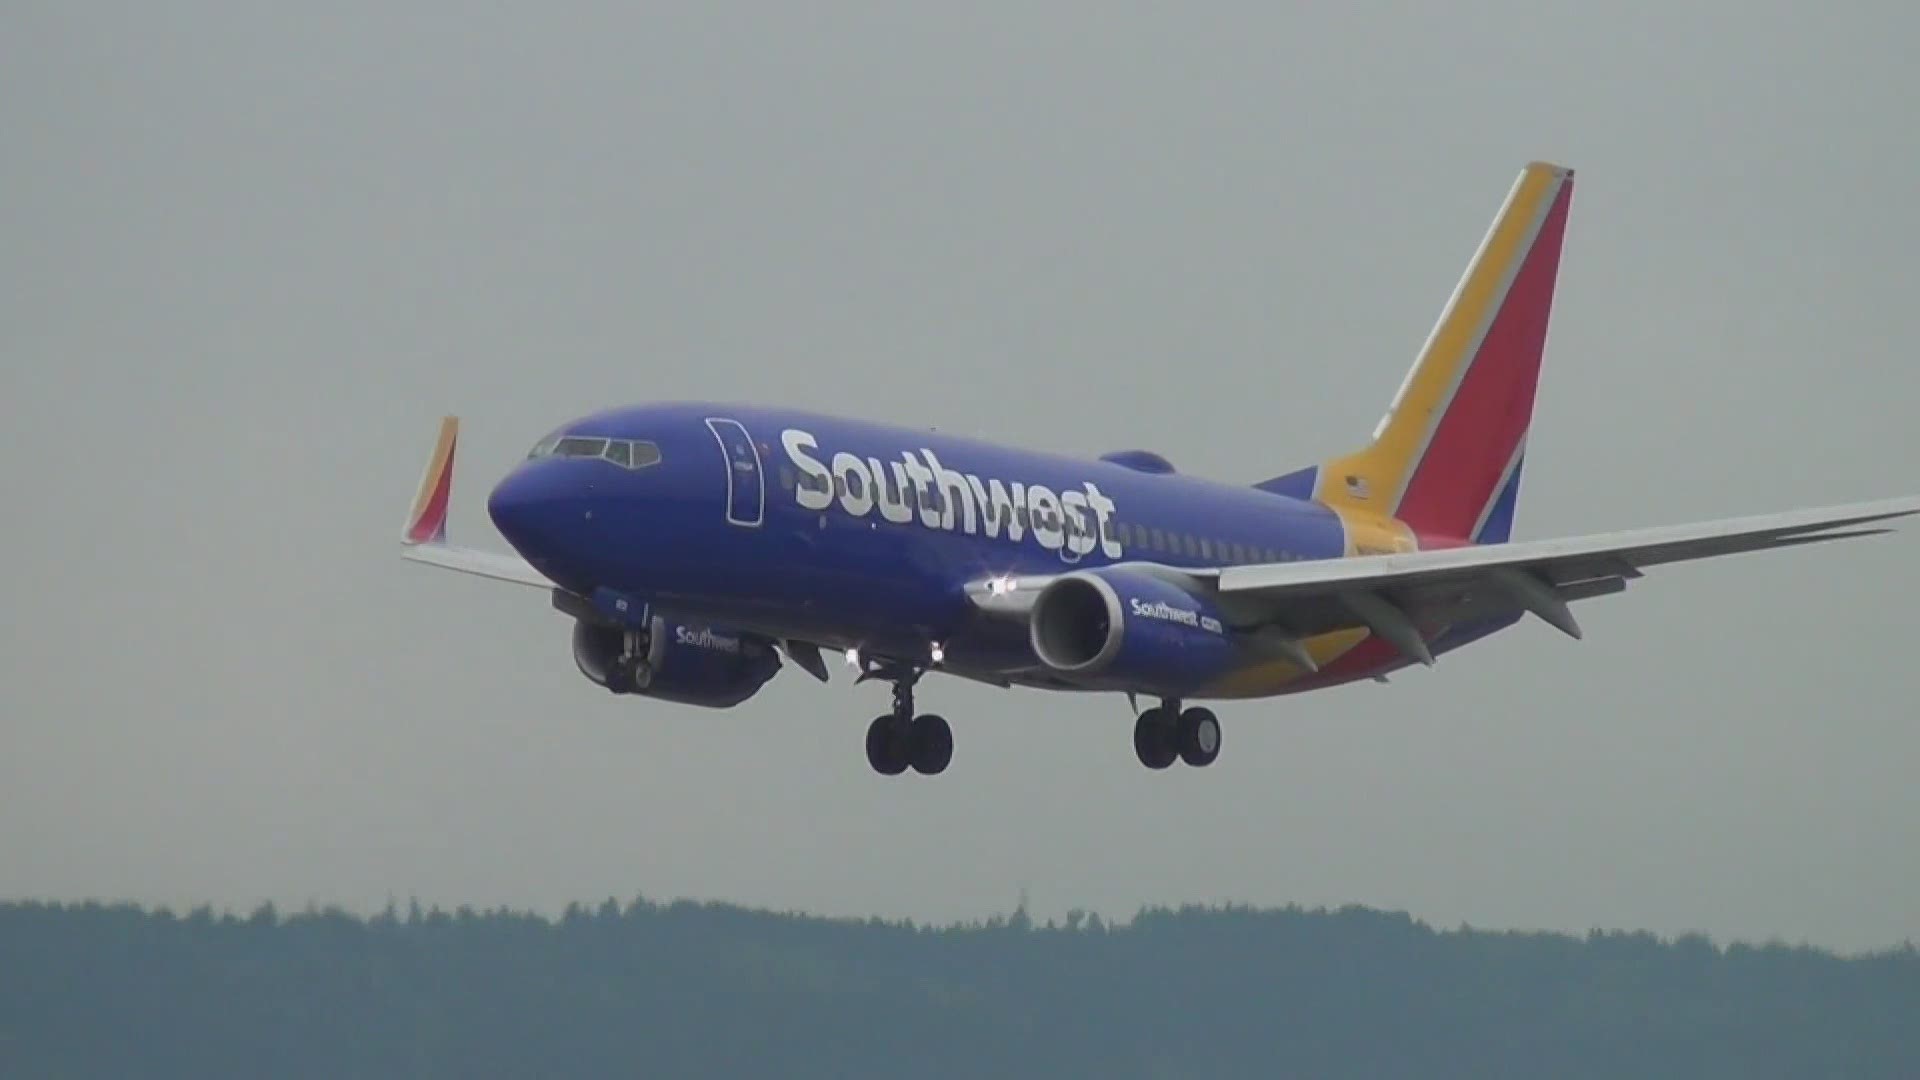 Southwest Airlines has announced they will soon serve Bellingham International Airport. The airline sees Bellingham as important for serving flights to Canada.